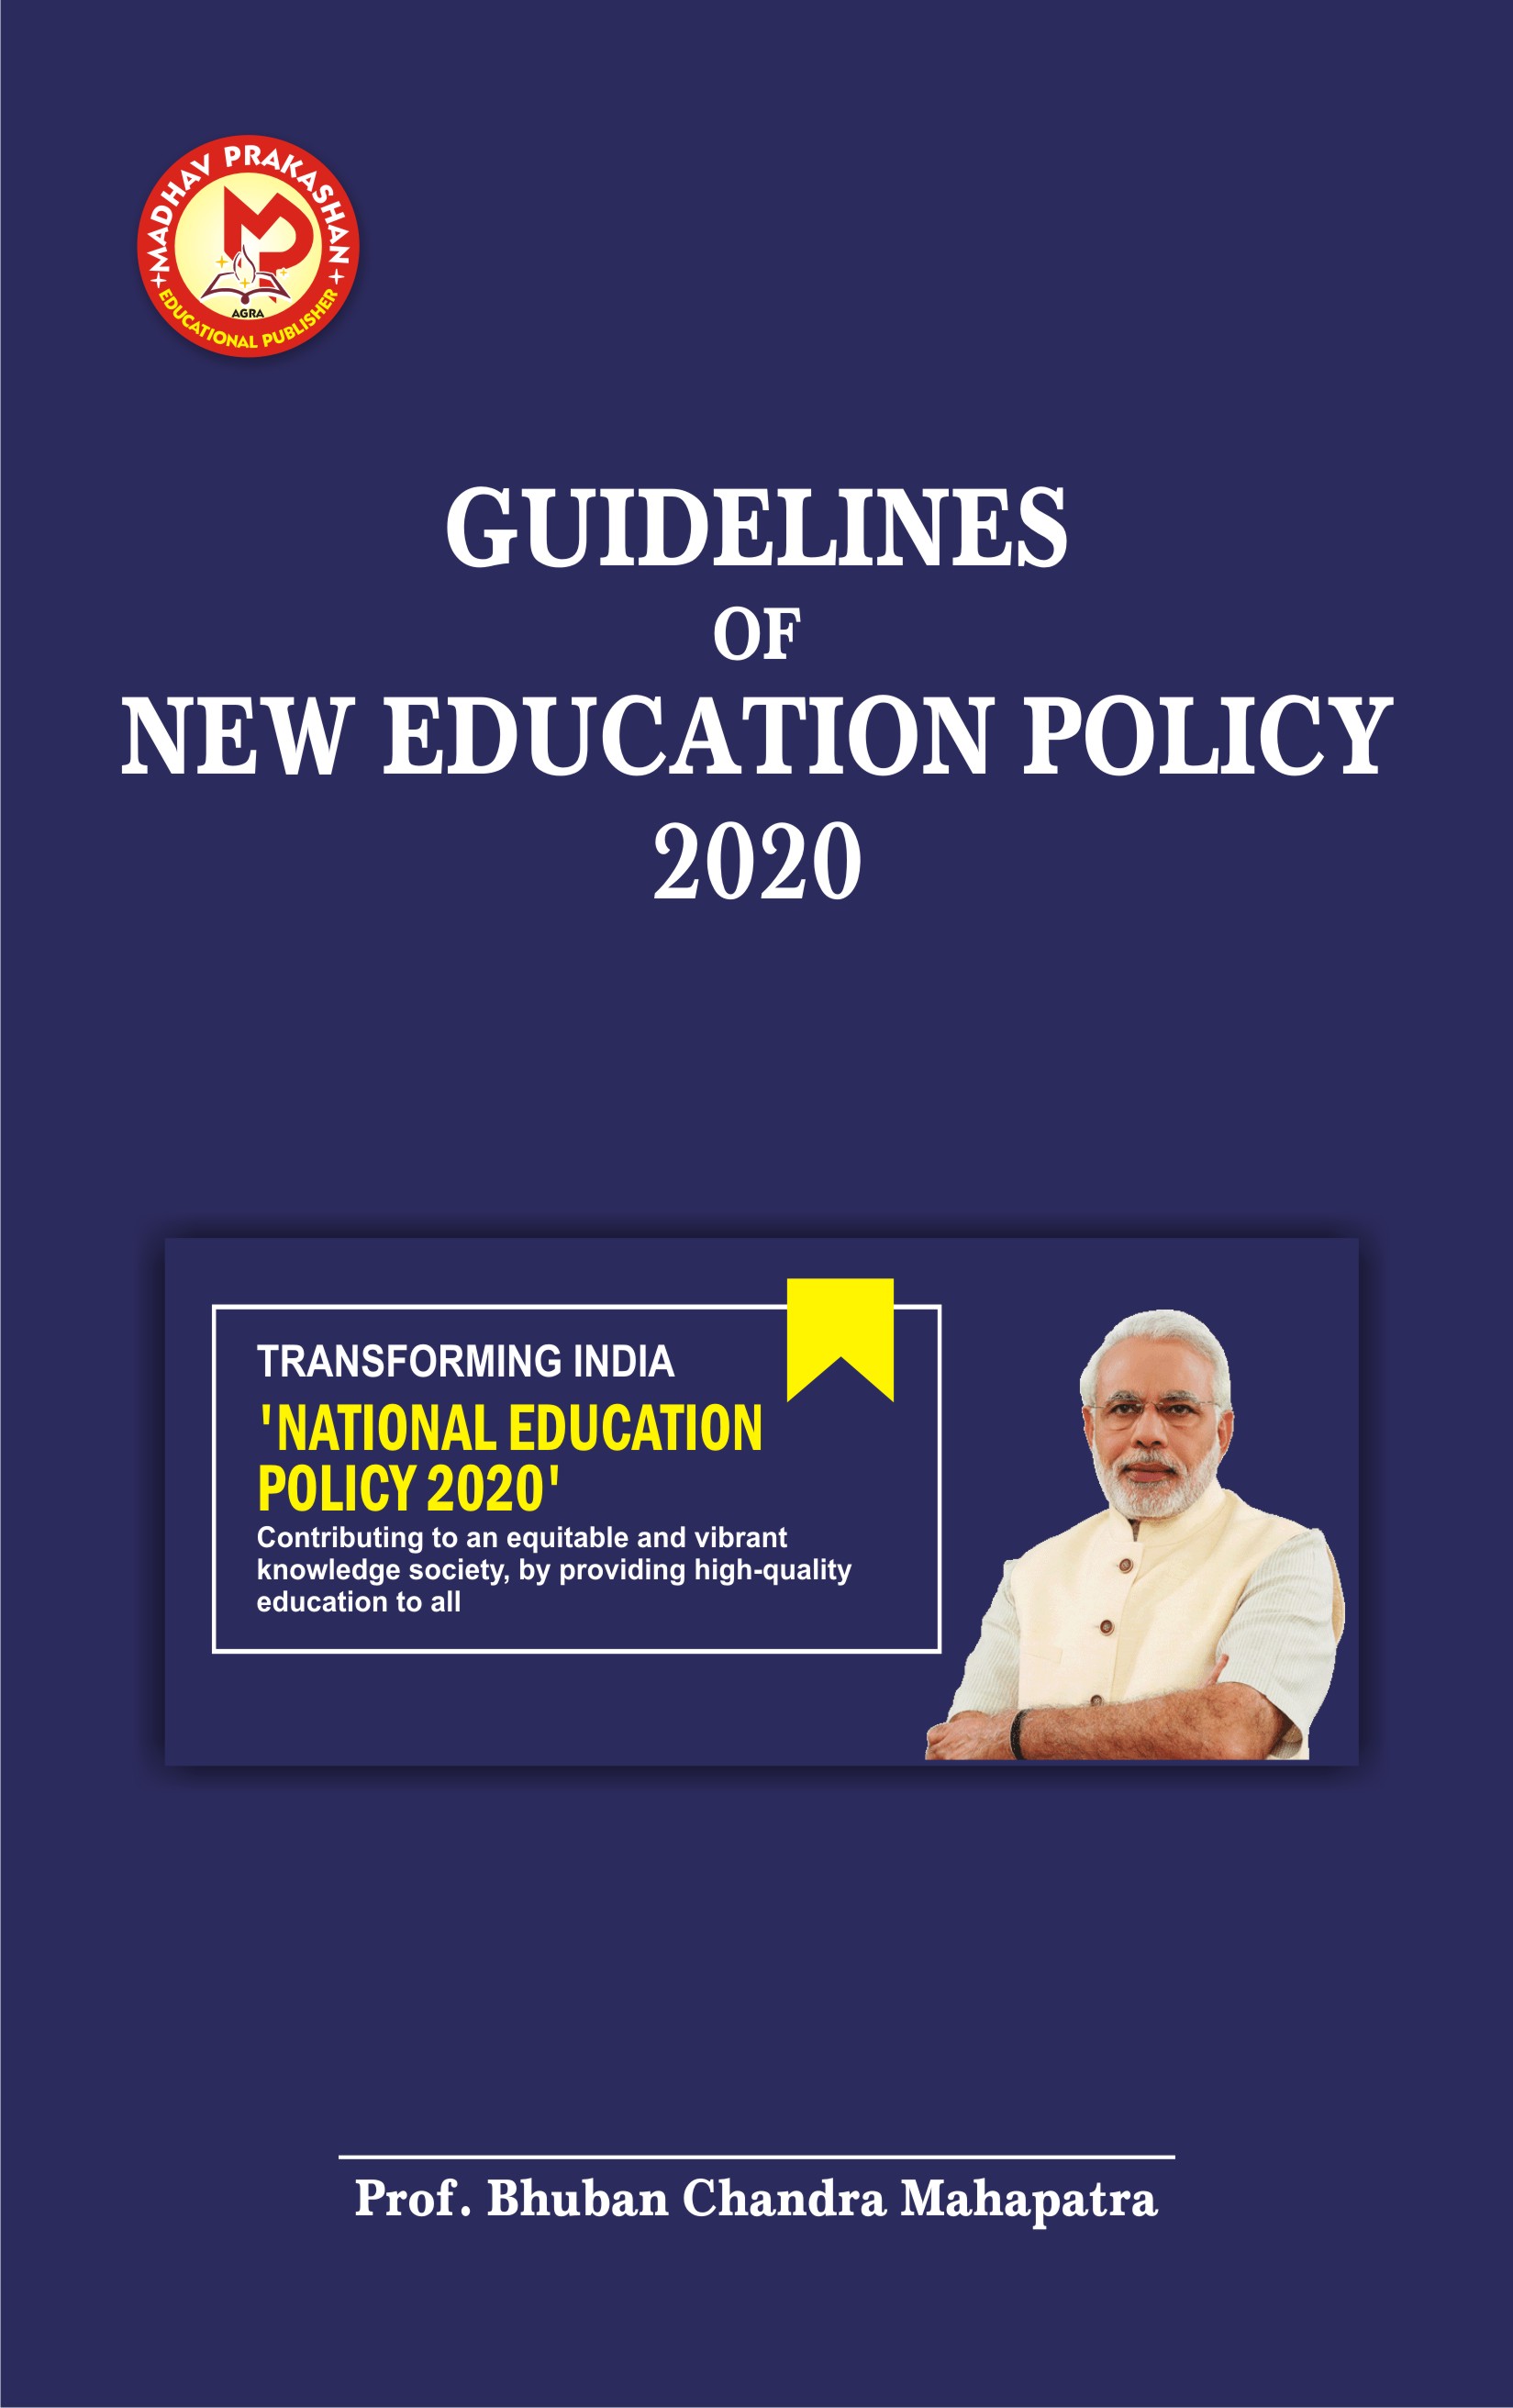 GUIDELINES-OF-NEW-EDUCATION-POLICY-2020